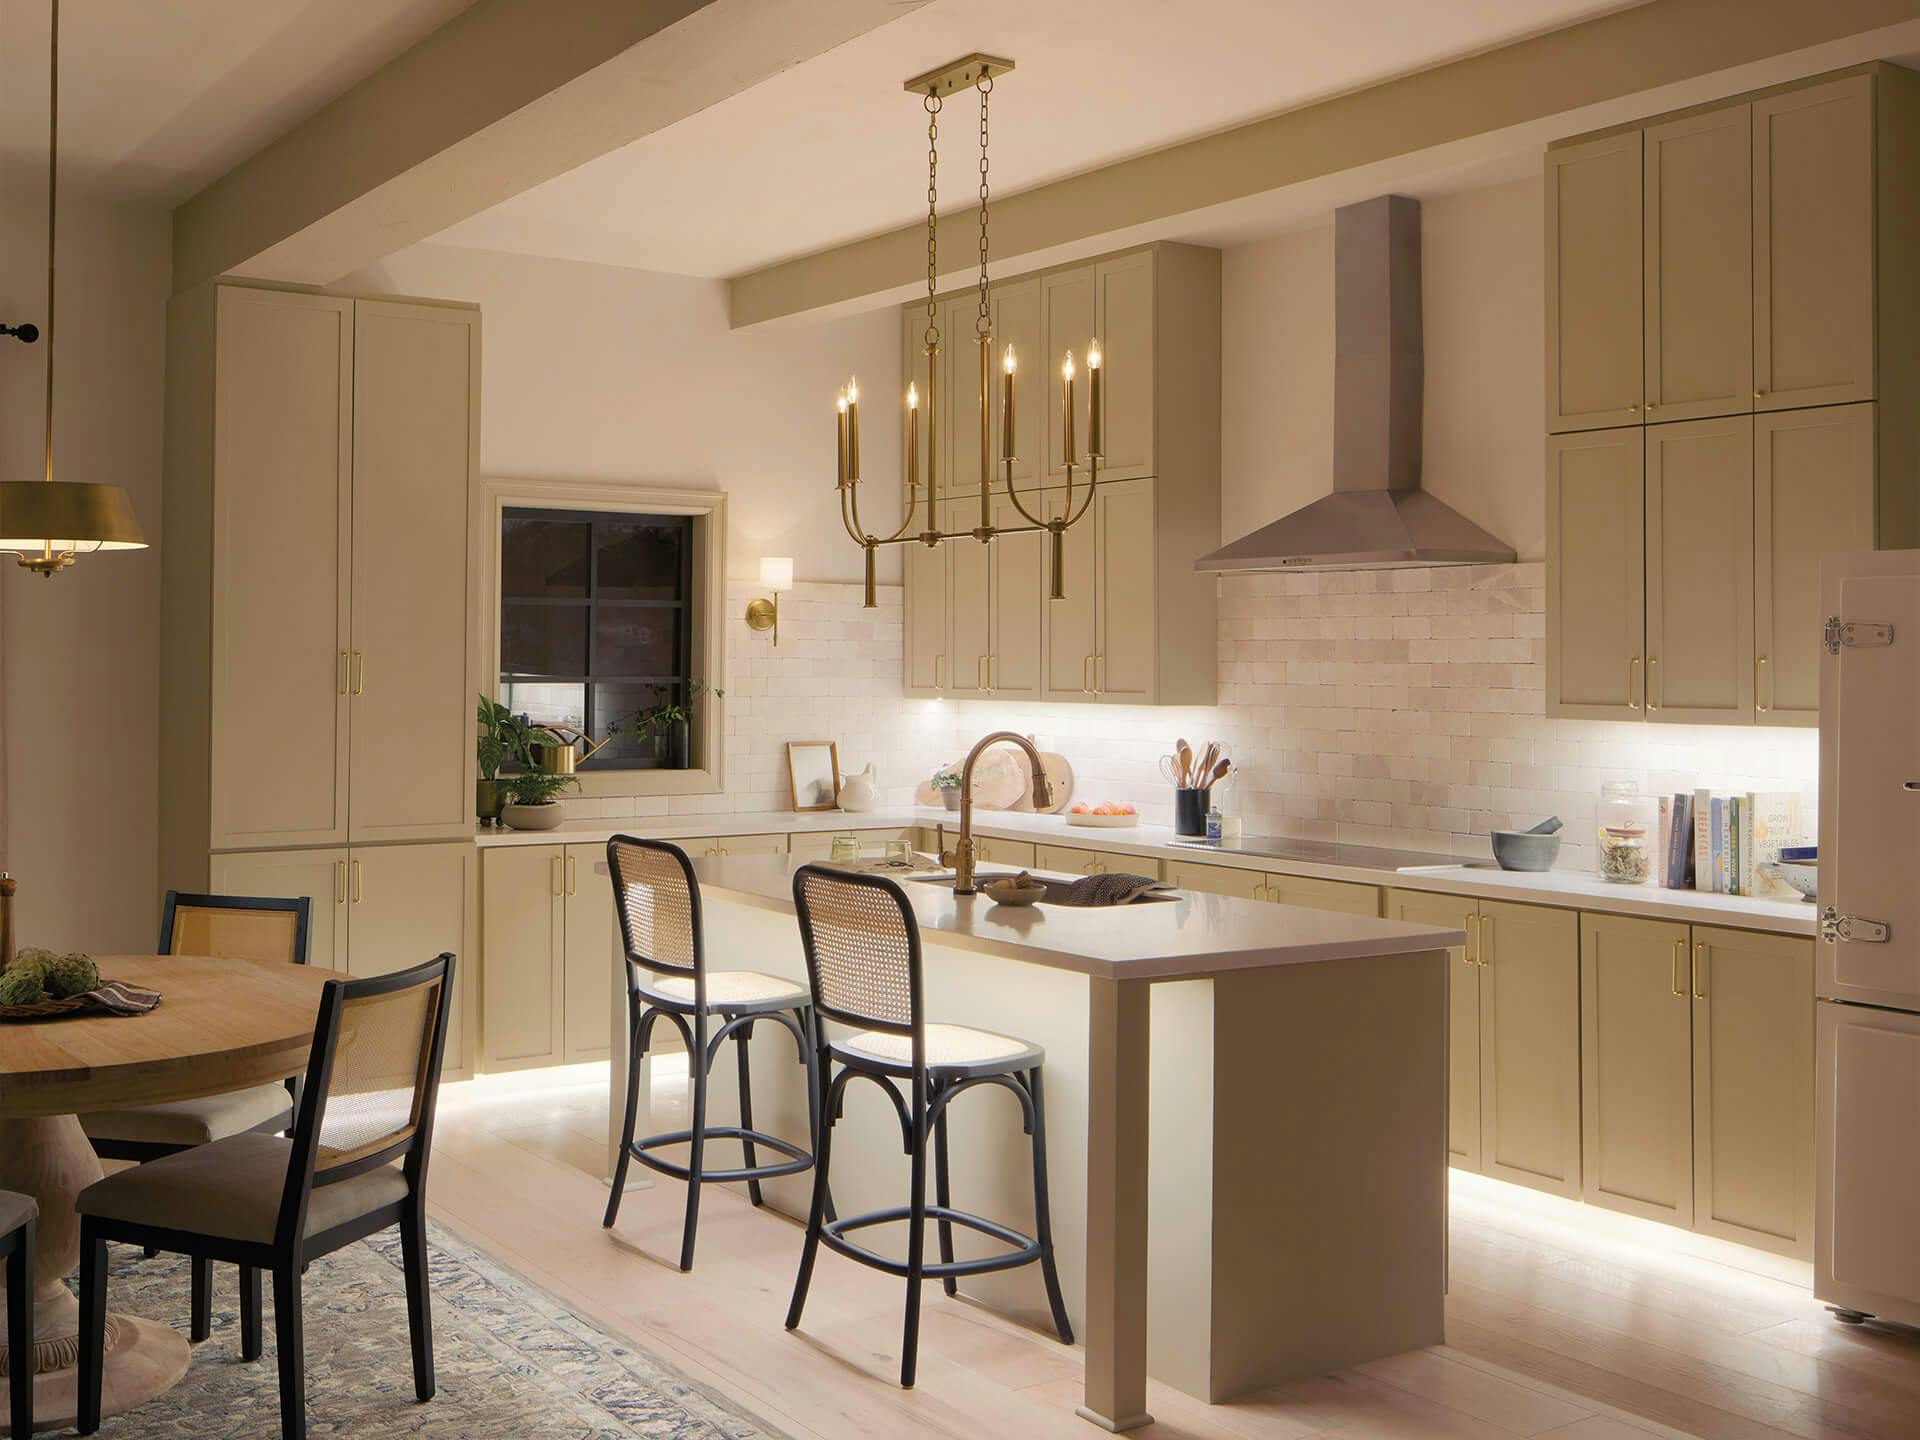 Beige kitchen at night with a Florence 6-light chandelier hanging over the island in brushed natural brass